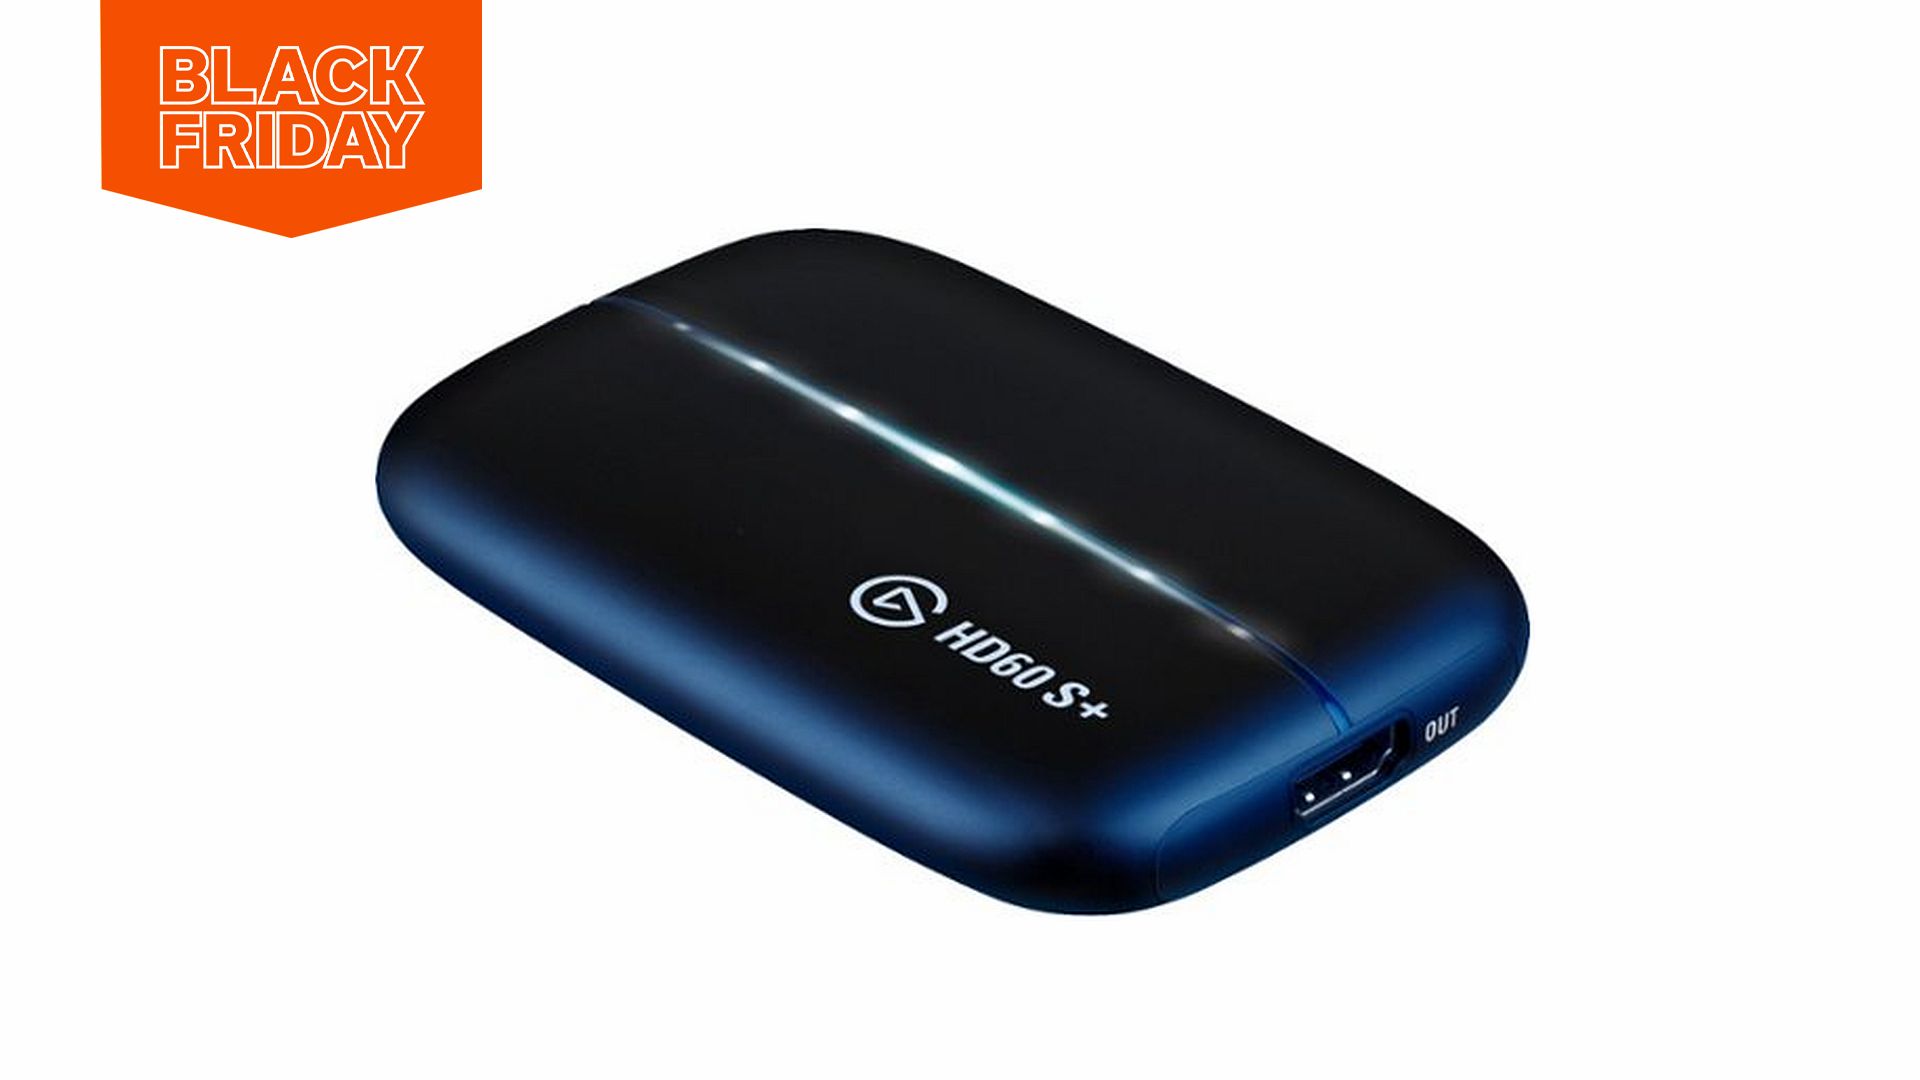 Save 25% on this Elgato HD60 S+ gaming capture card for Cyber Monday